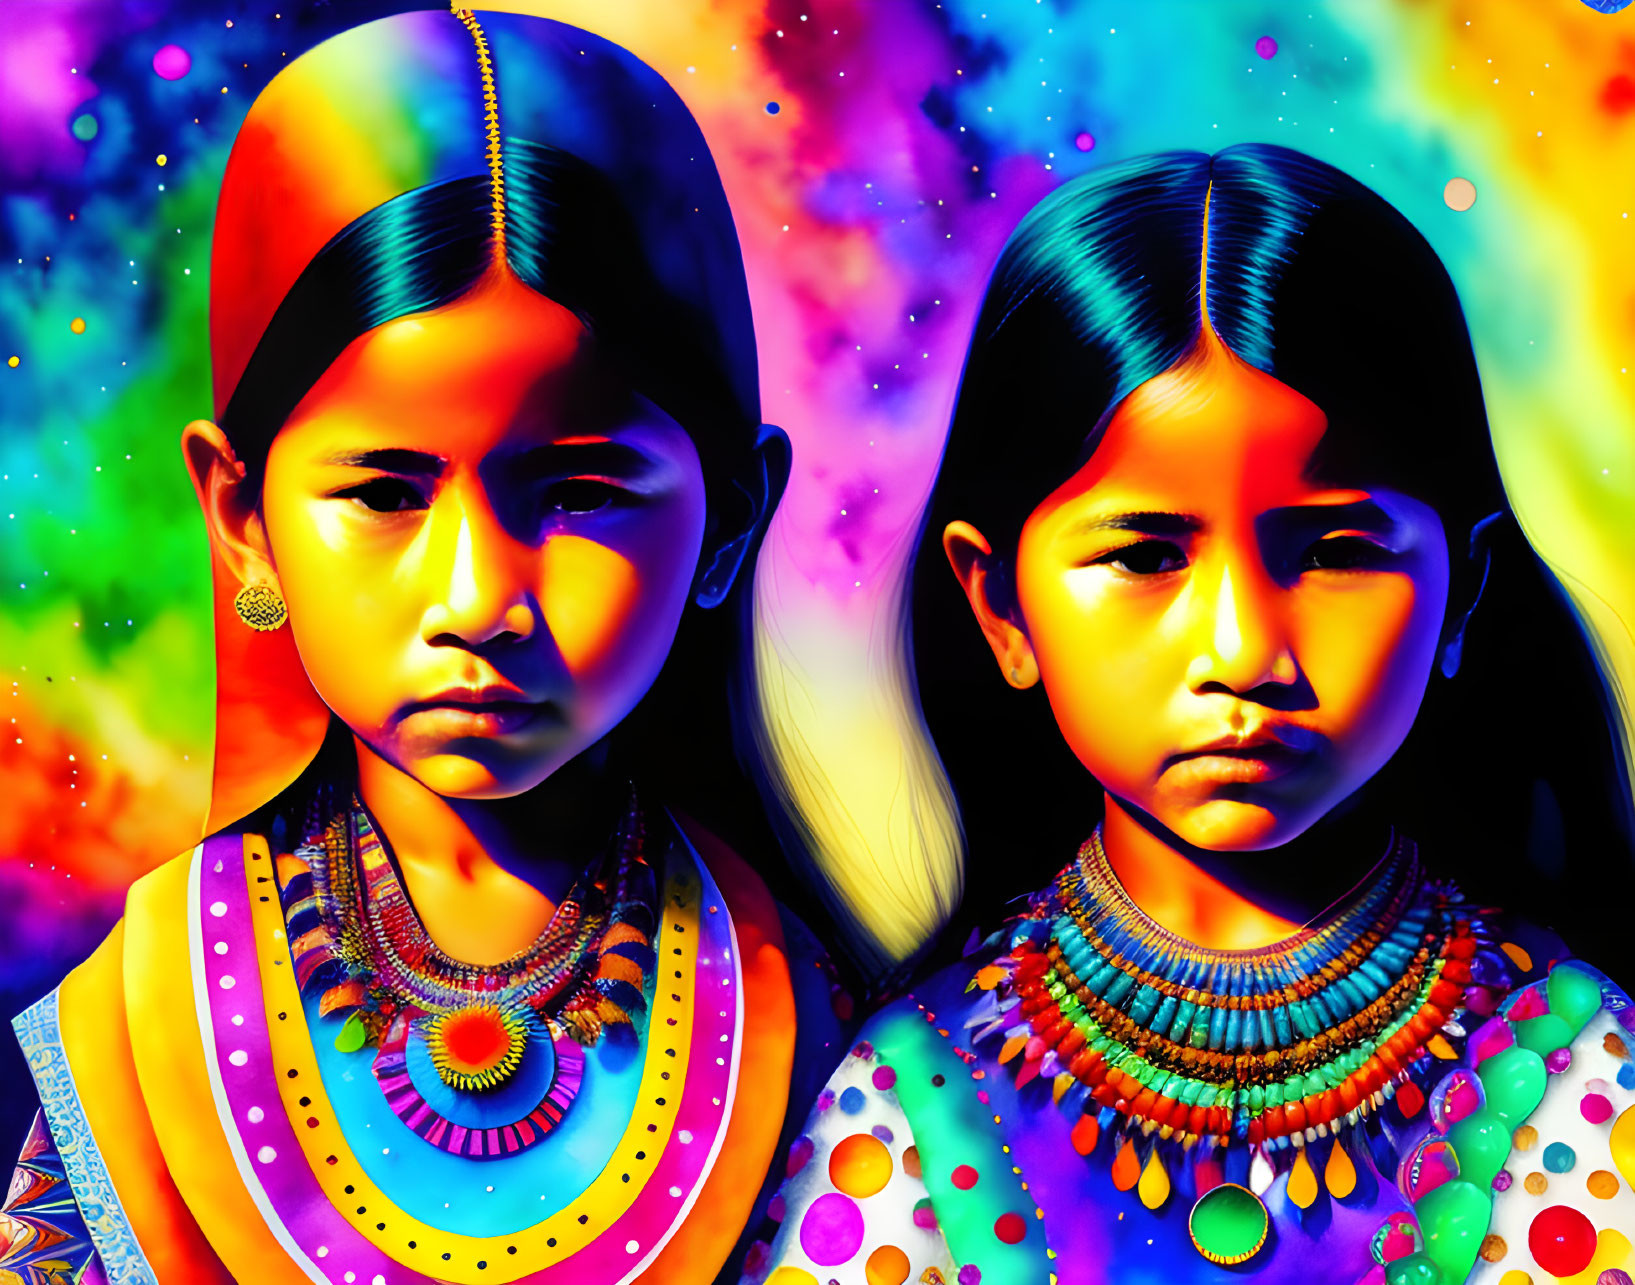 Two girls in traditional attire against vibrant psychedelic background